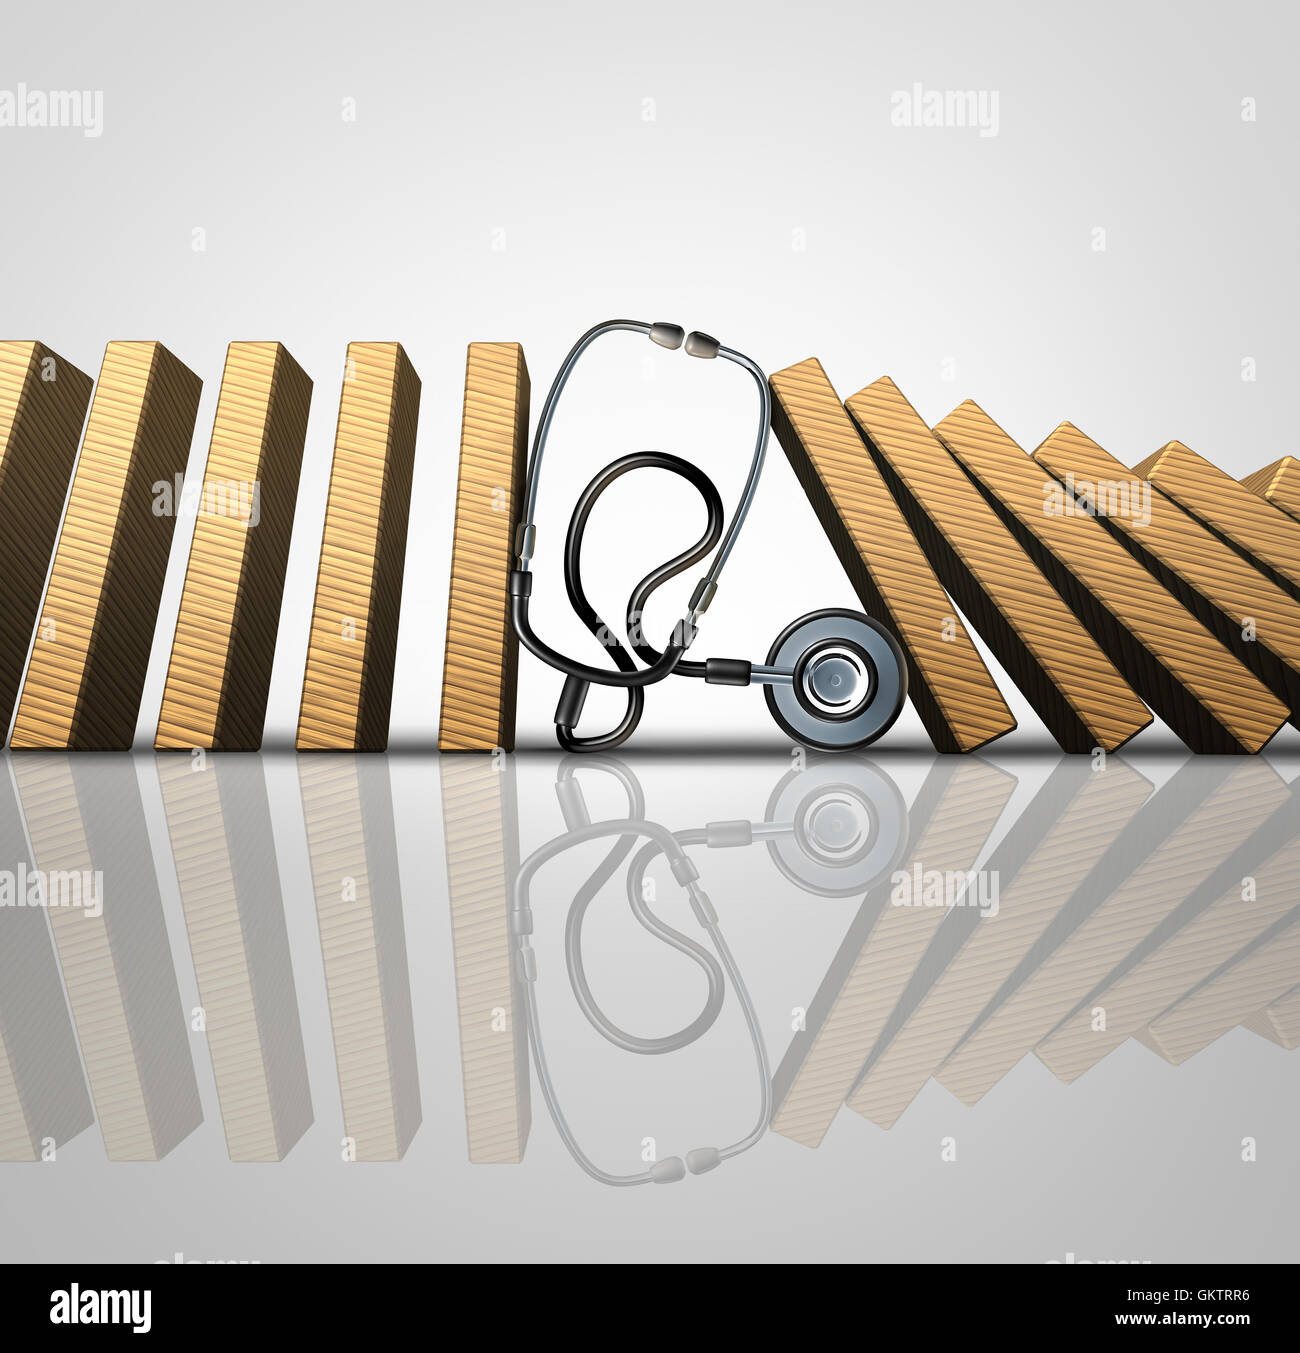 Medical treatment symbol as a hospital doctor stethoscope stopping domino pieces from falling further as a metaphor for treating a patient with proper diagnosis of symptoms as a 3D illustration. Stock Photo